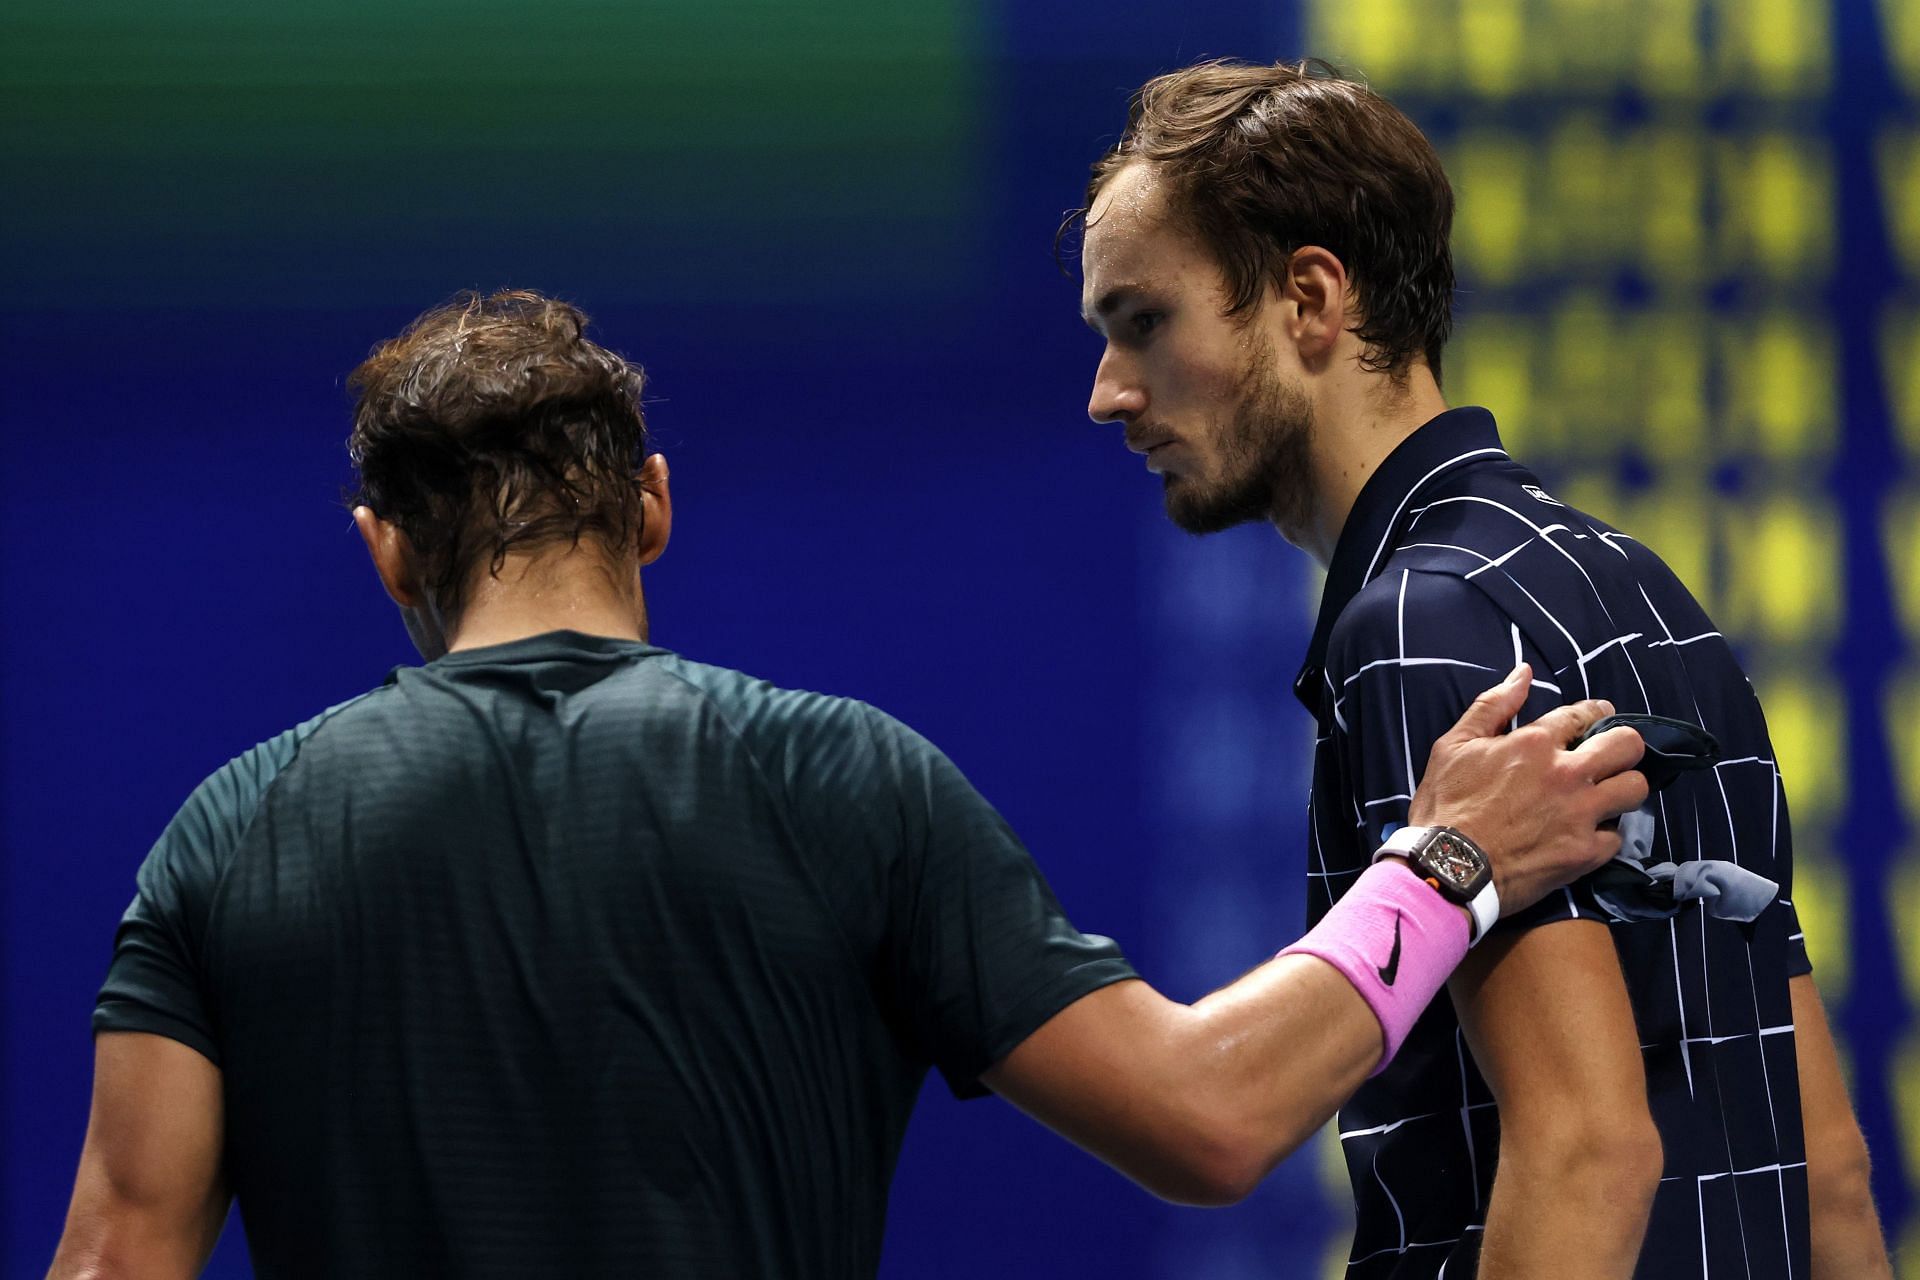 Medvedev beat Nadal for the first time at the 2020 ATP Finals